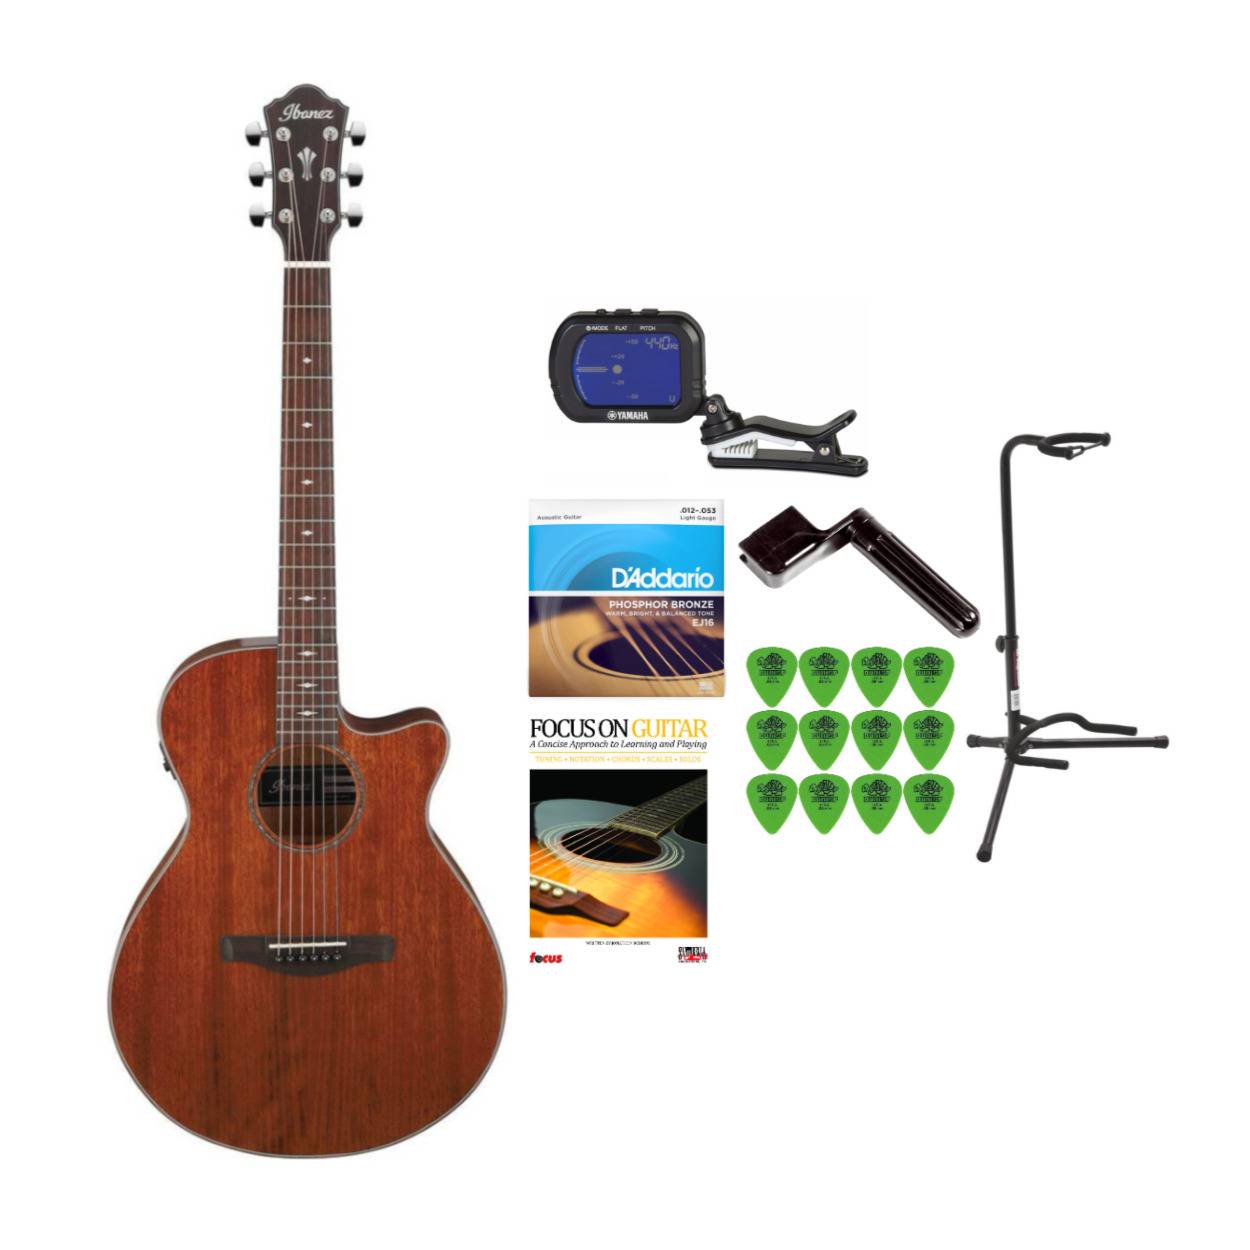 Ibanez AEG220 6-String Acoustic-Electric Guitar (Right-Hand, Natural Low Gloss) Bundle